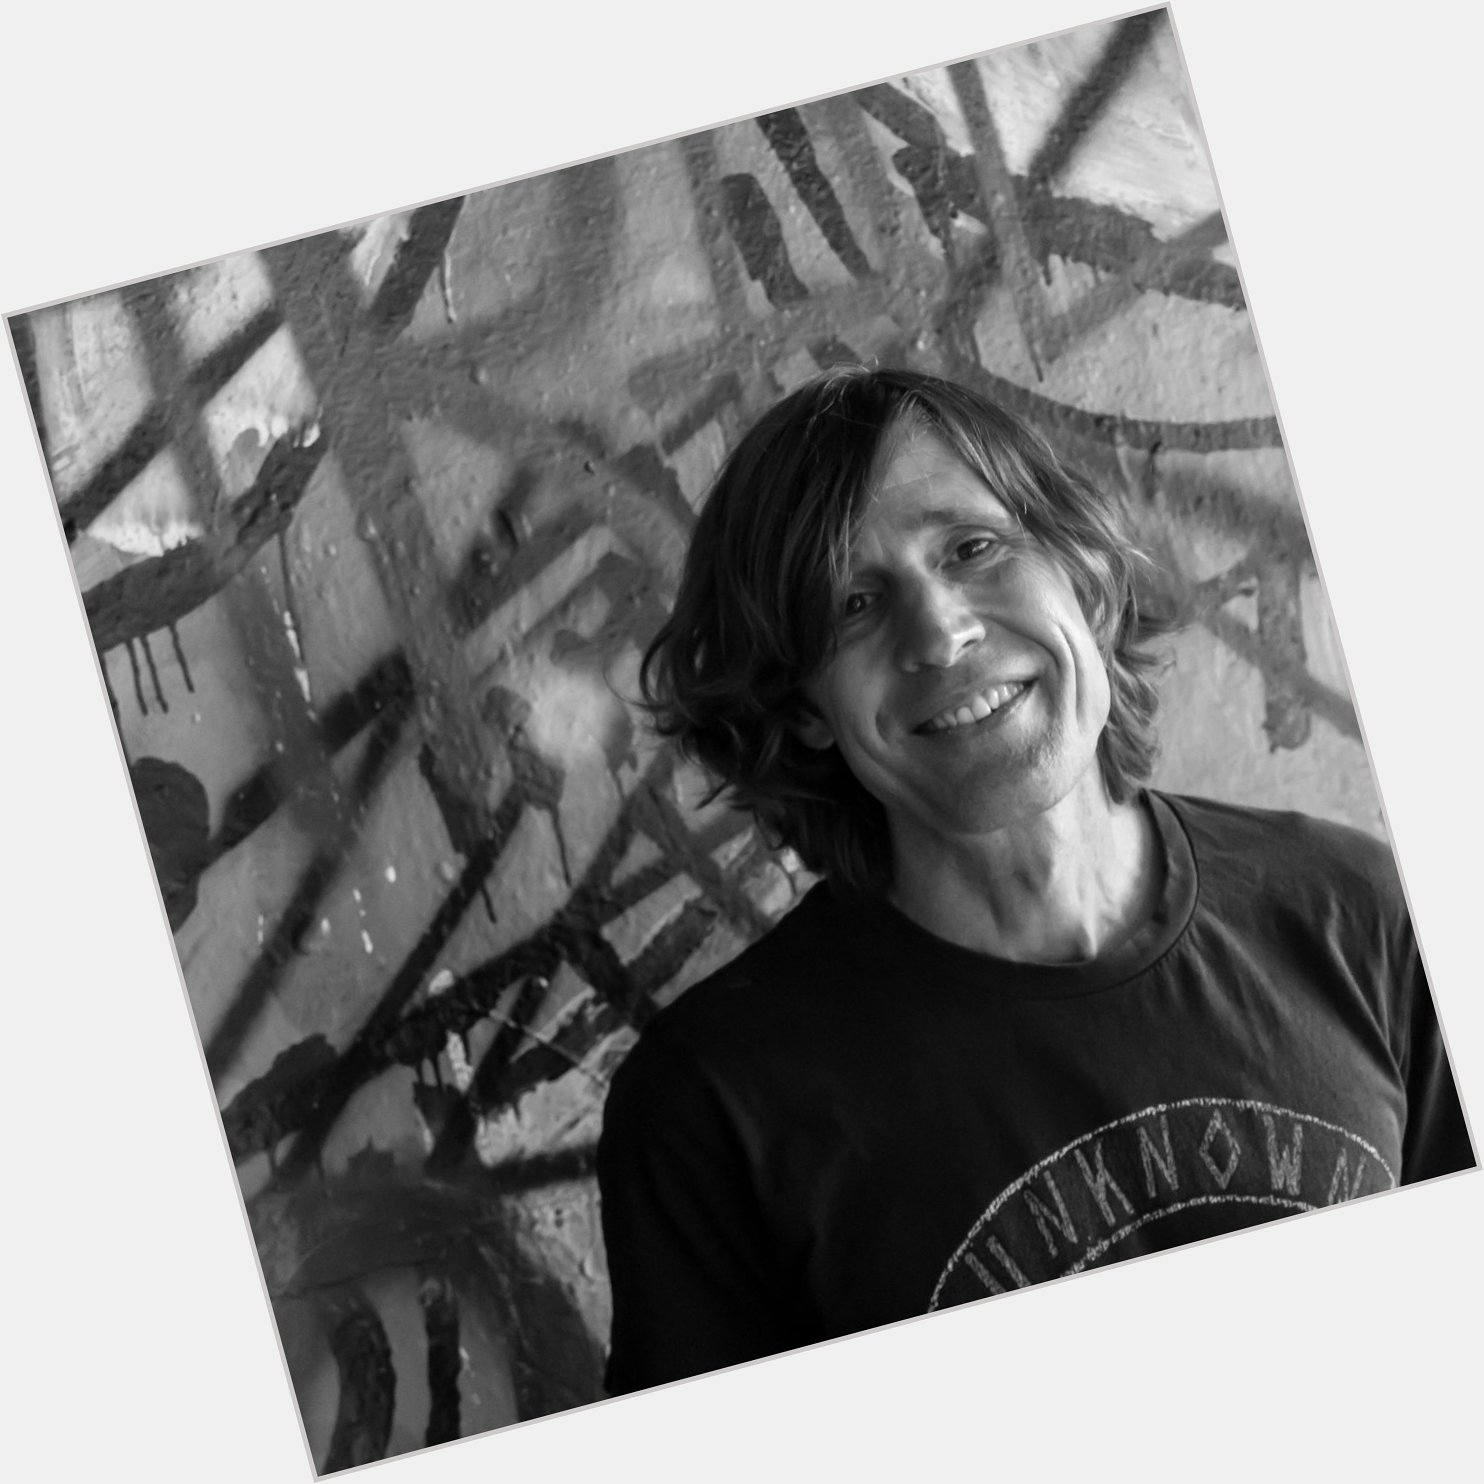 Happy birthday to the skateboarding legend, pioneer, and overall life inspiration - Rodney Mullen.

Shot by me. 